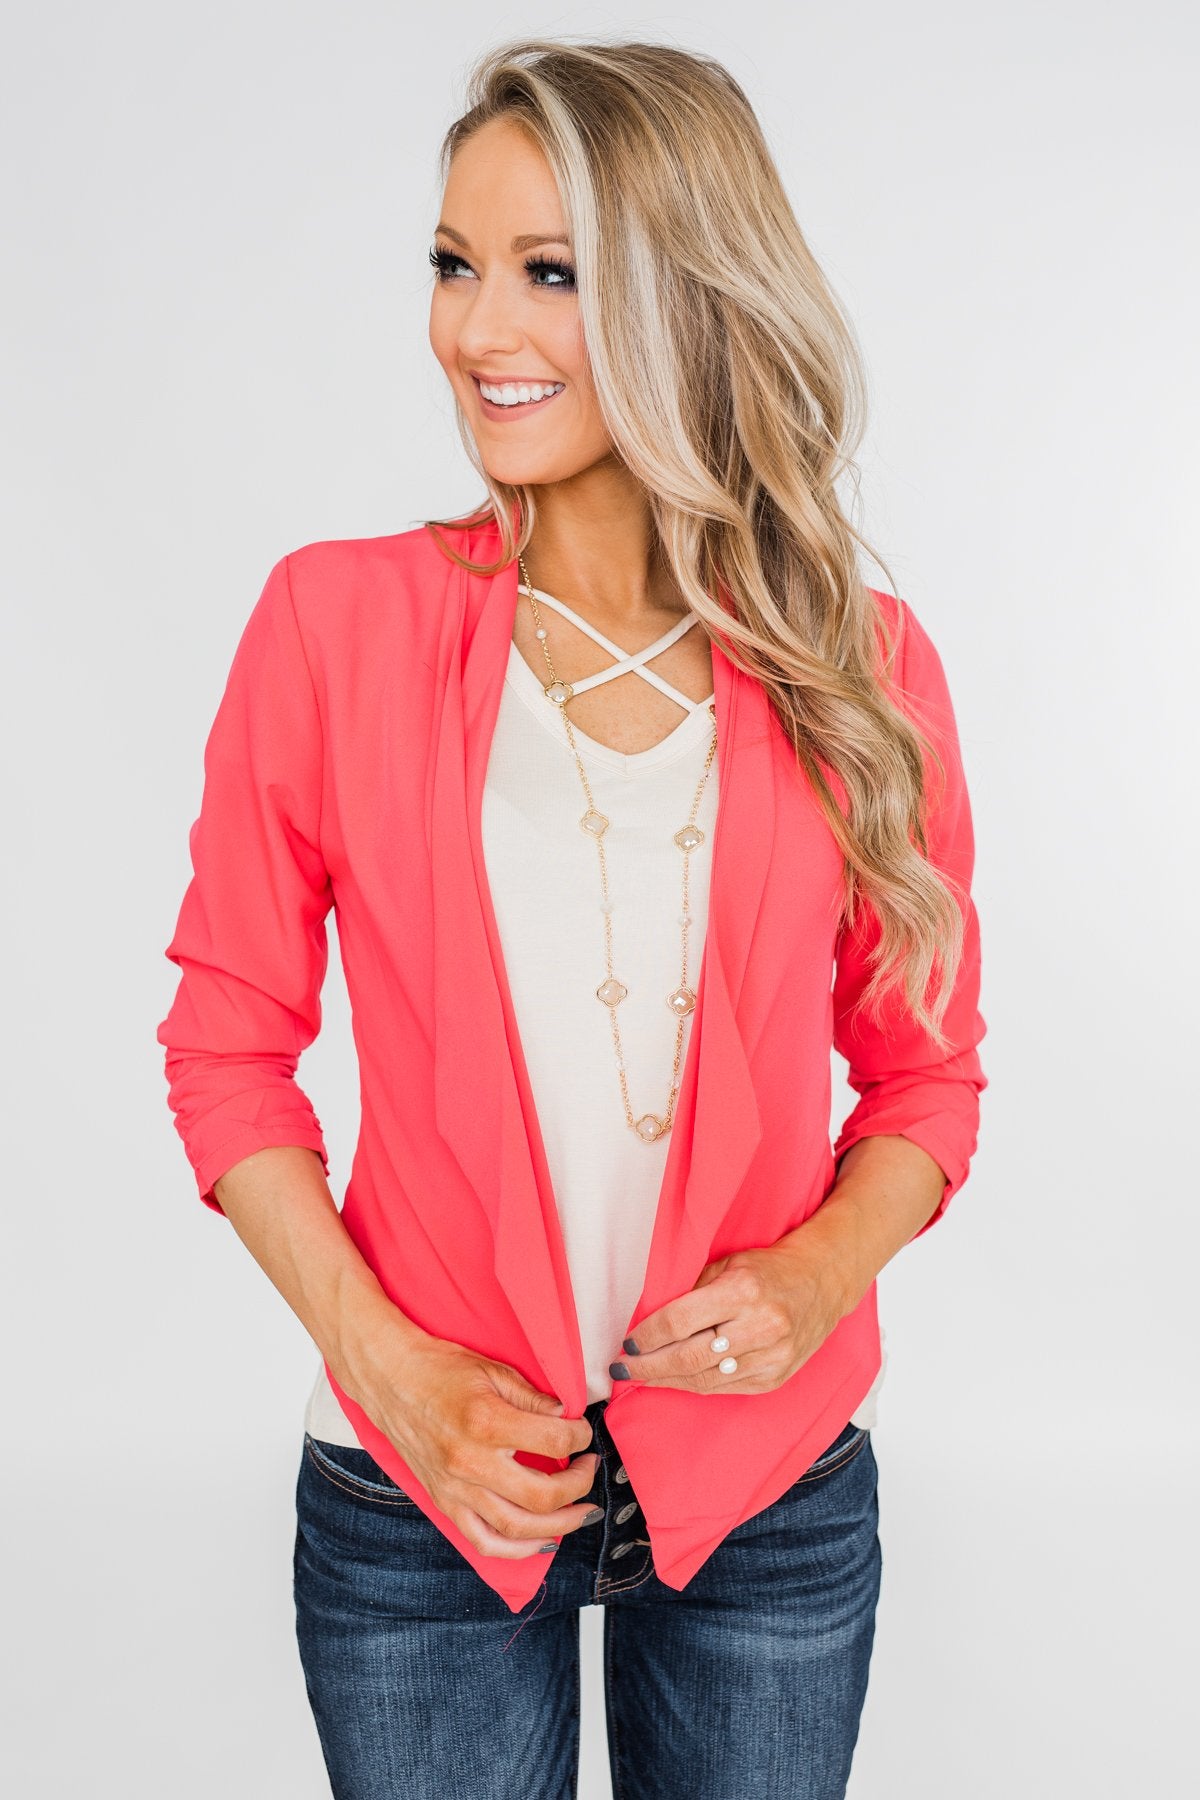 Keep It Professional Blazer- Neon Pink – The Pulse Boutique